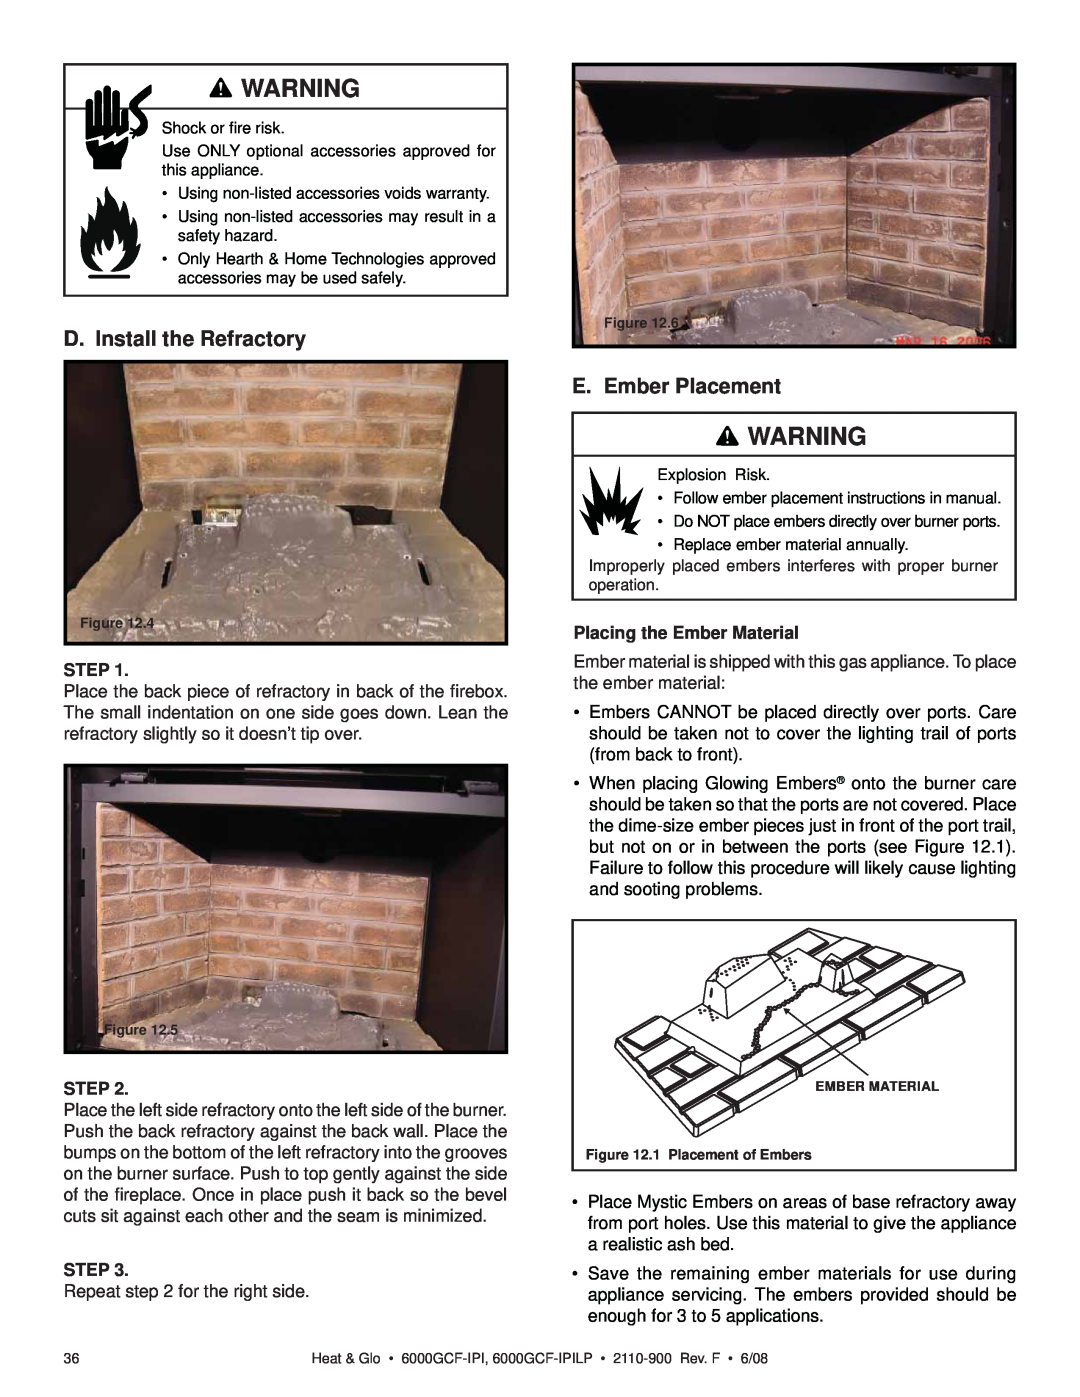 Heat & Glo LifeStyle 6000GCF-IPILP D. Install the Refractory, E. Ember Placement, Step, Placing the Ember Material 